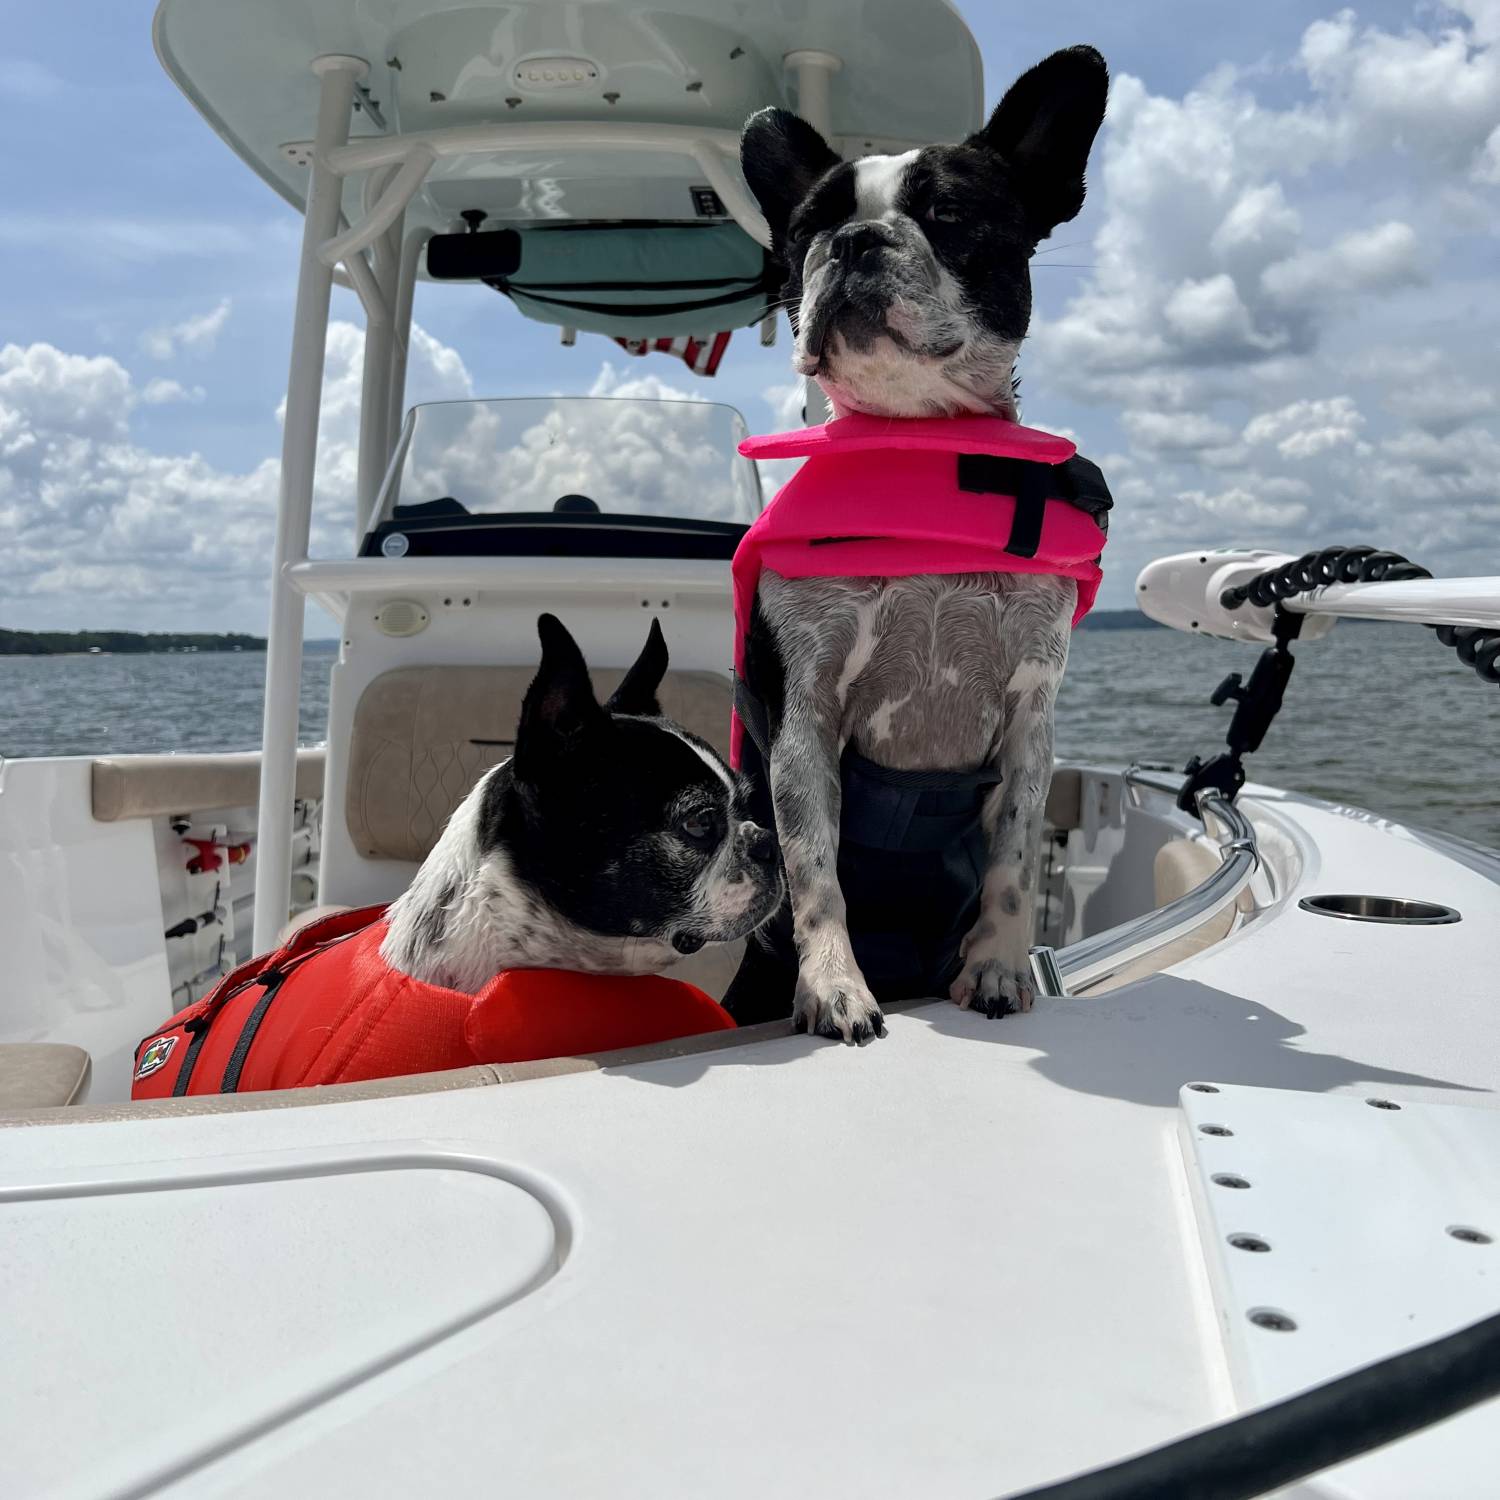 Loki and Lucy scouting for a place to dock!